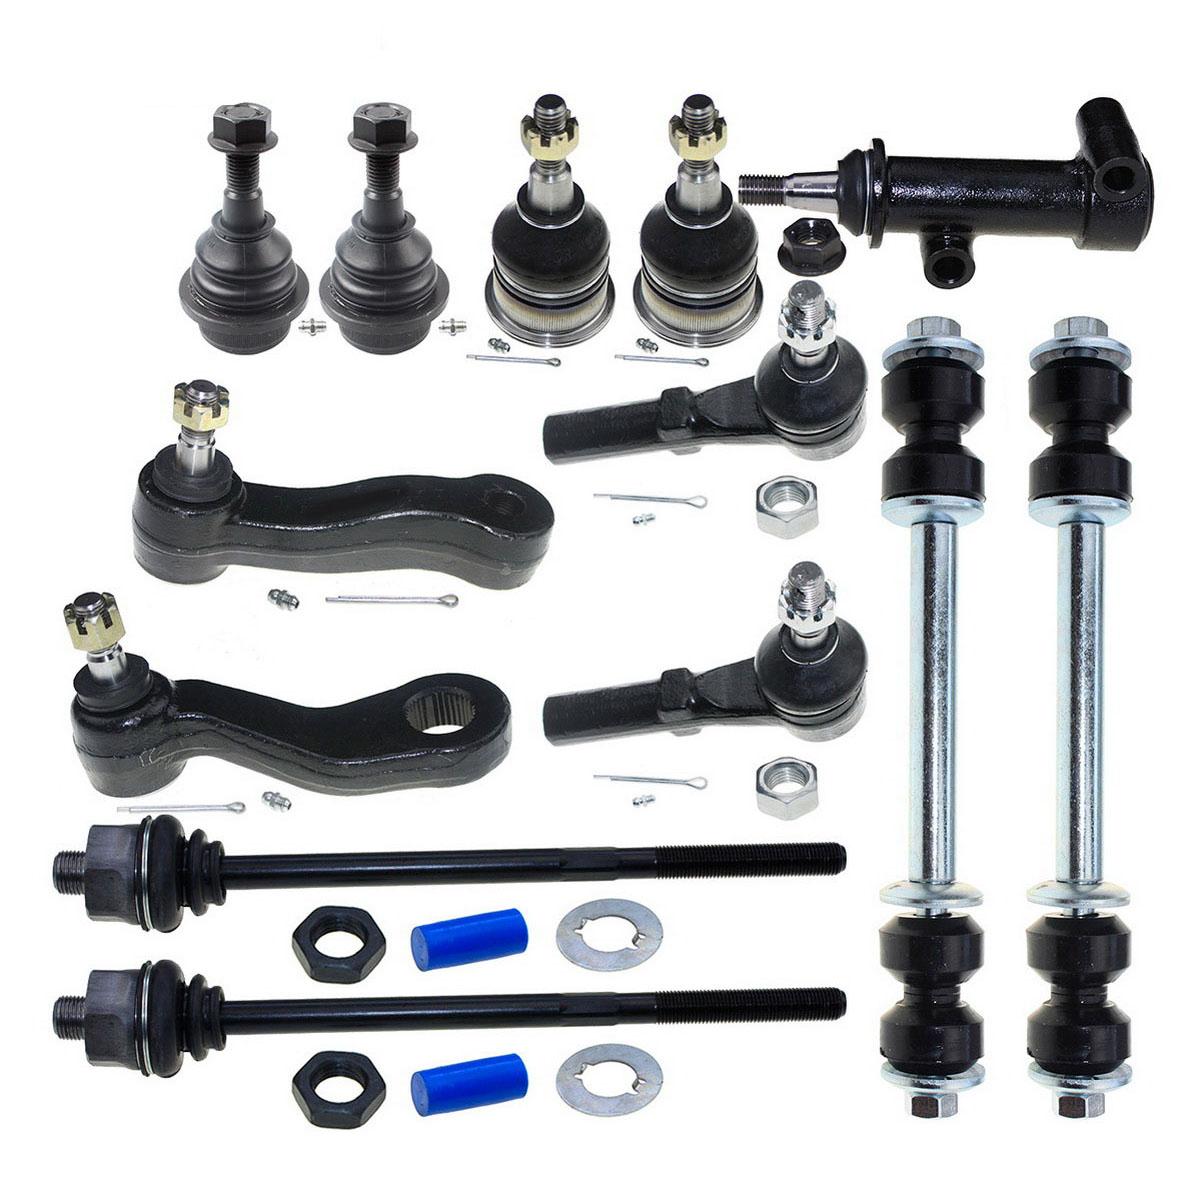 10 pcs Tie Rod Linkages Ball Joint Suspension Kit for Chevy Silverado 2500 HD